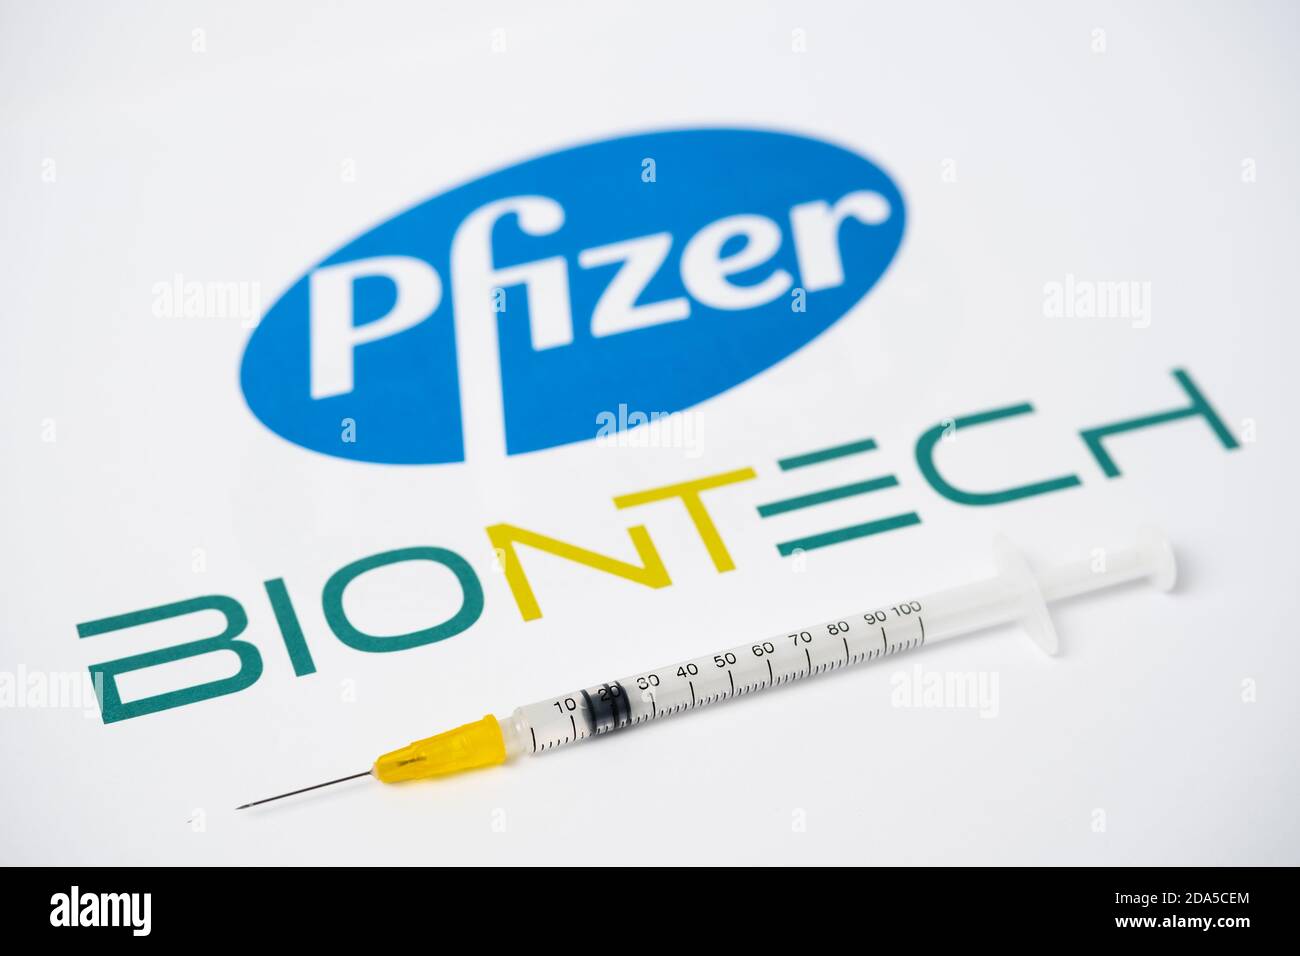 Stafford / United Kingdom - November 9 2020: Pfizer BioNTech Covid-19 vaccine concept. Syringe balanced on a fingertip and blurred company logos on th Stock Photo